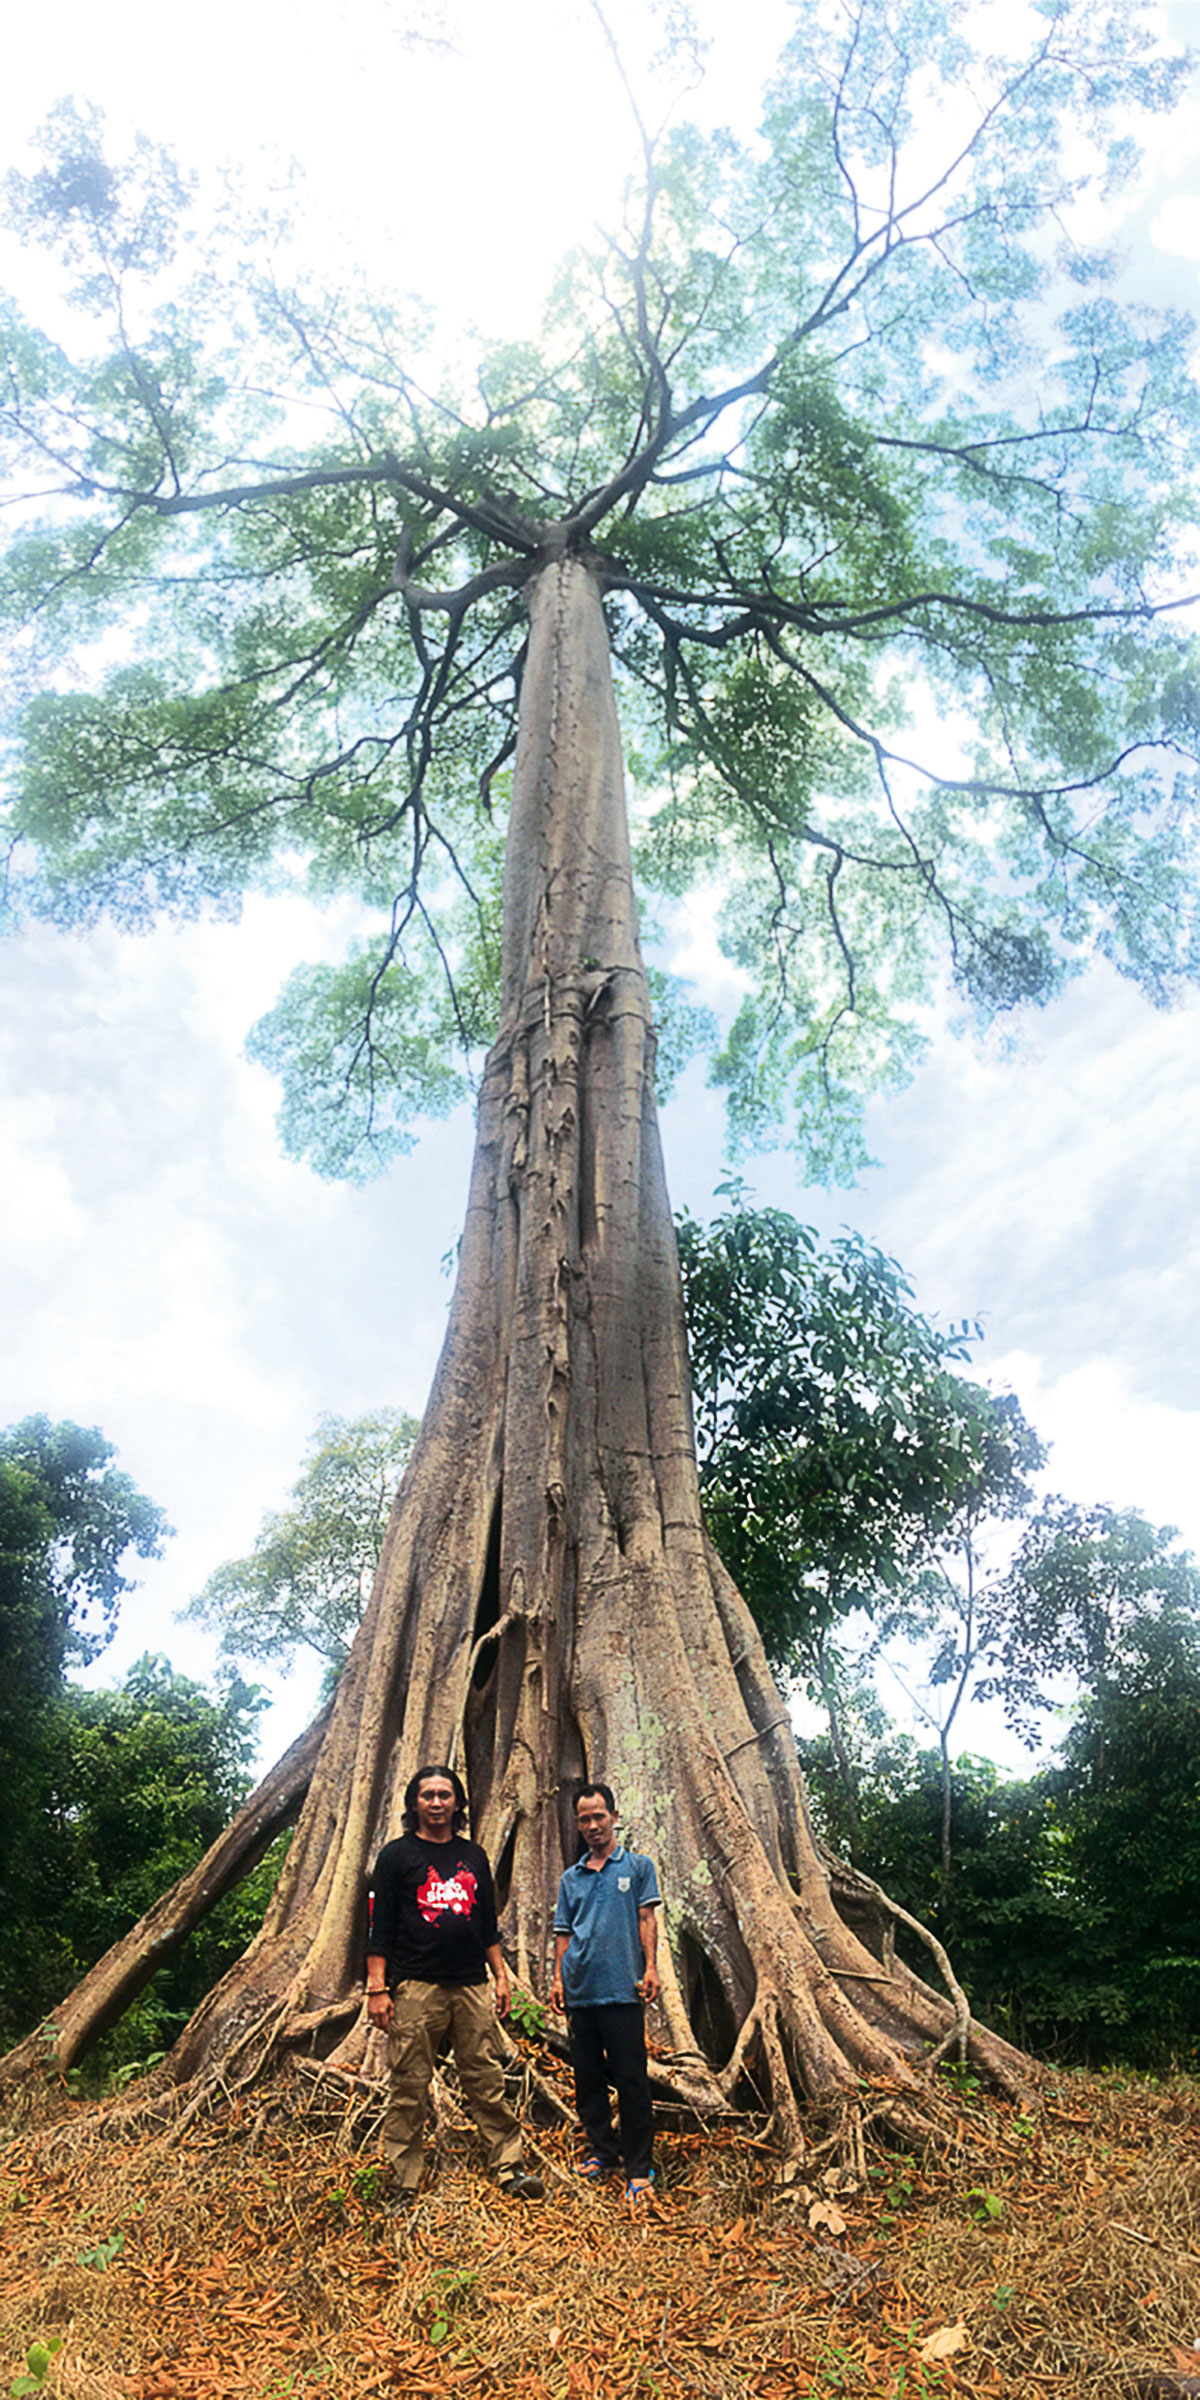 Feri and Marhoni in front of giant trees in Sepintun